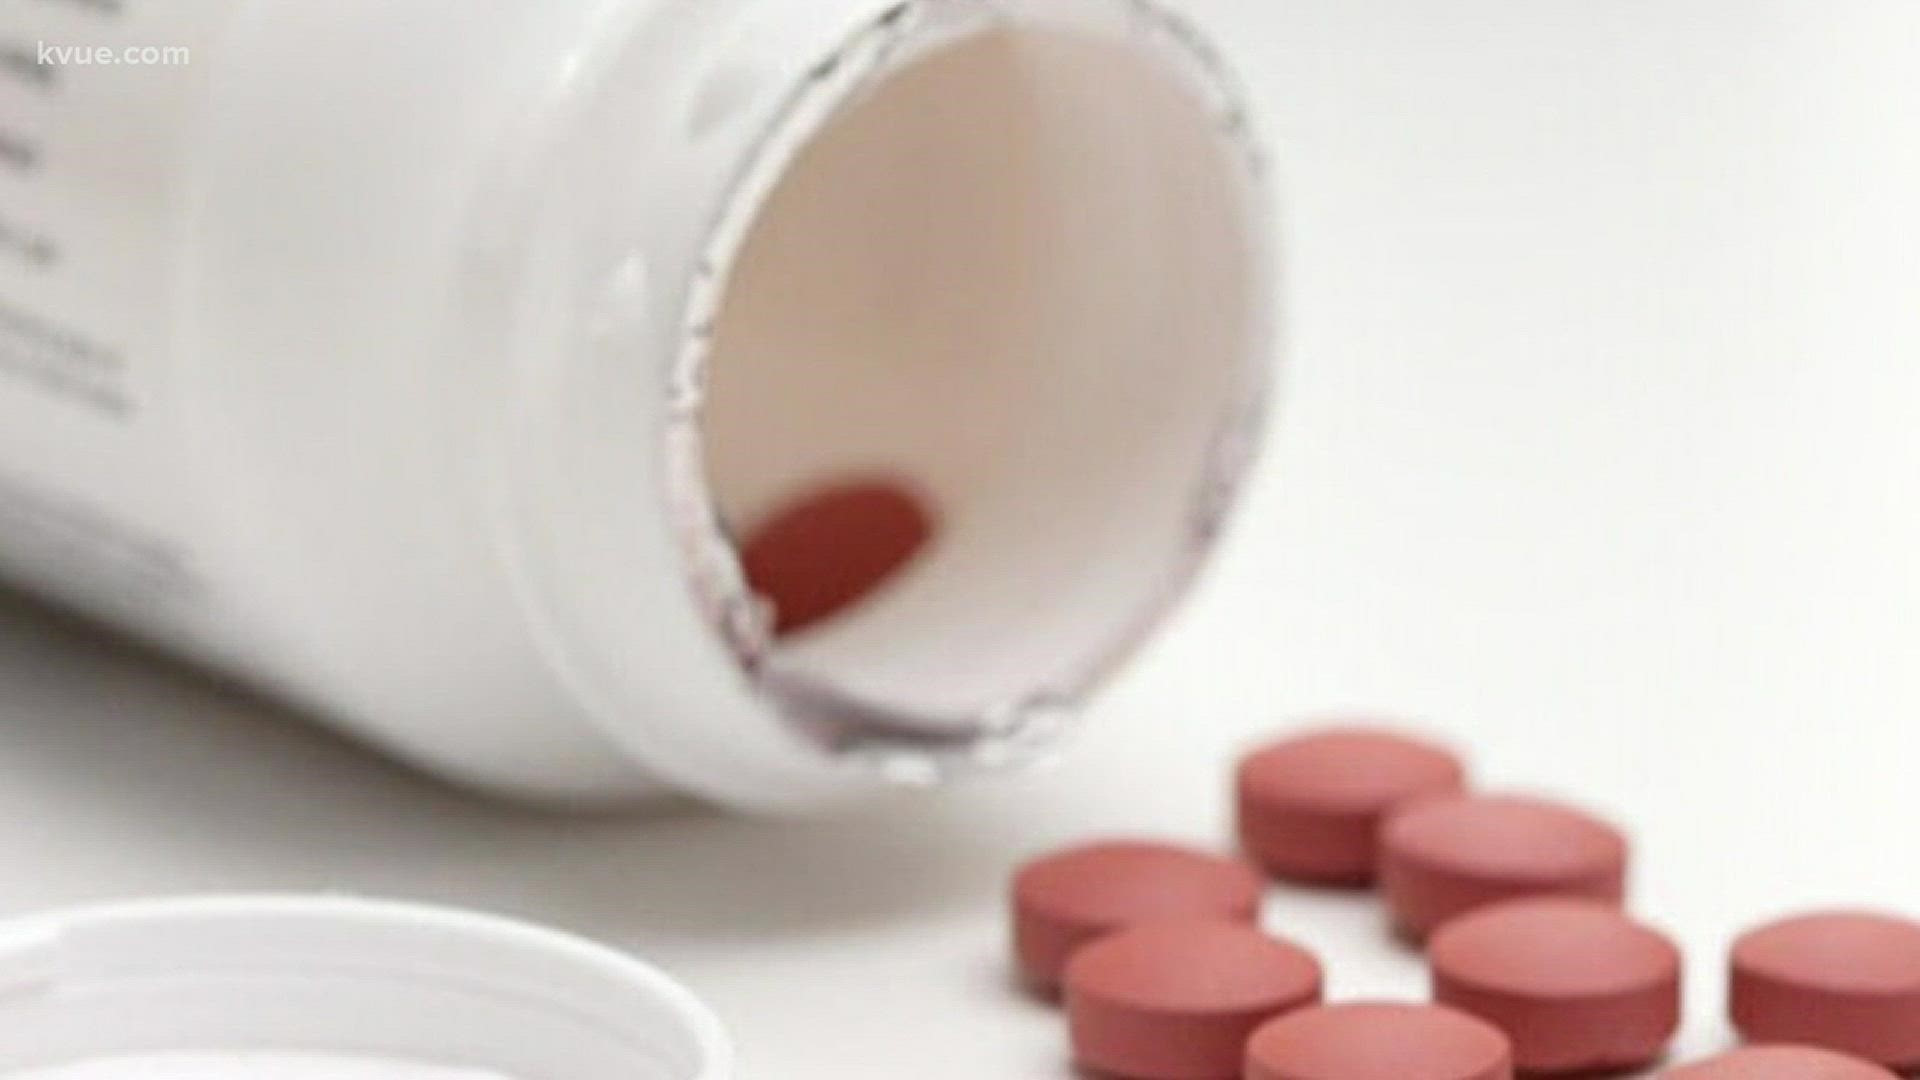 A new study shows ibuprofen can damage men's ability to have kids.